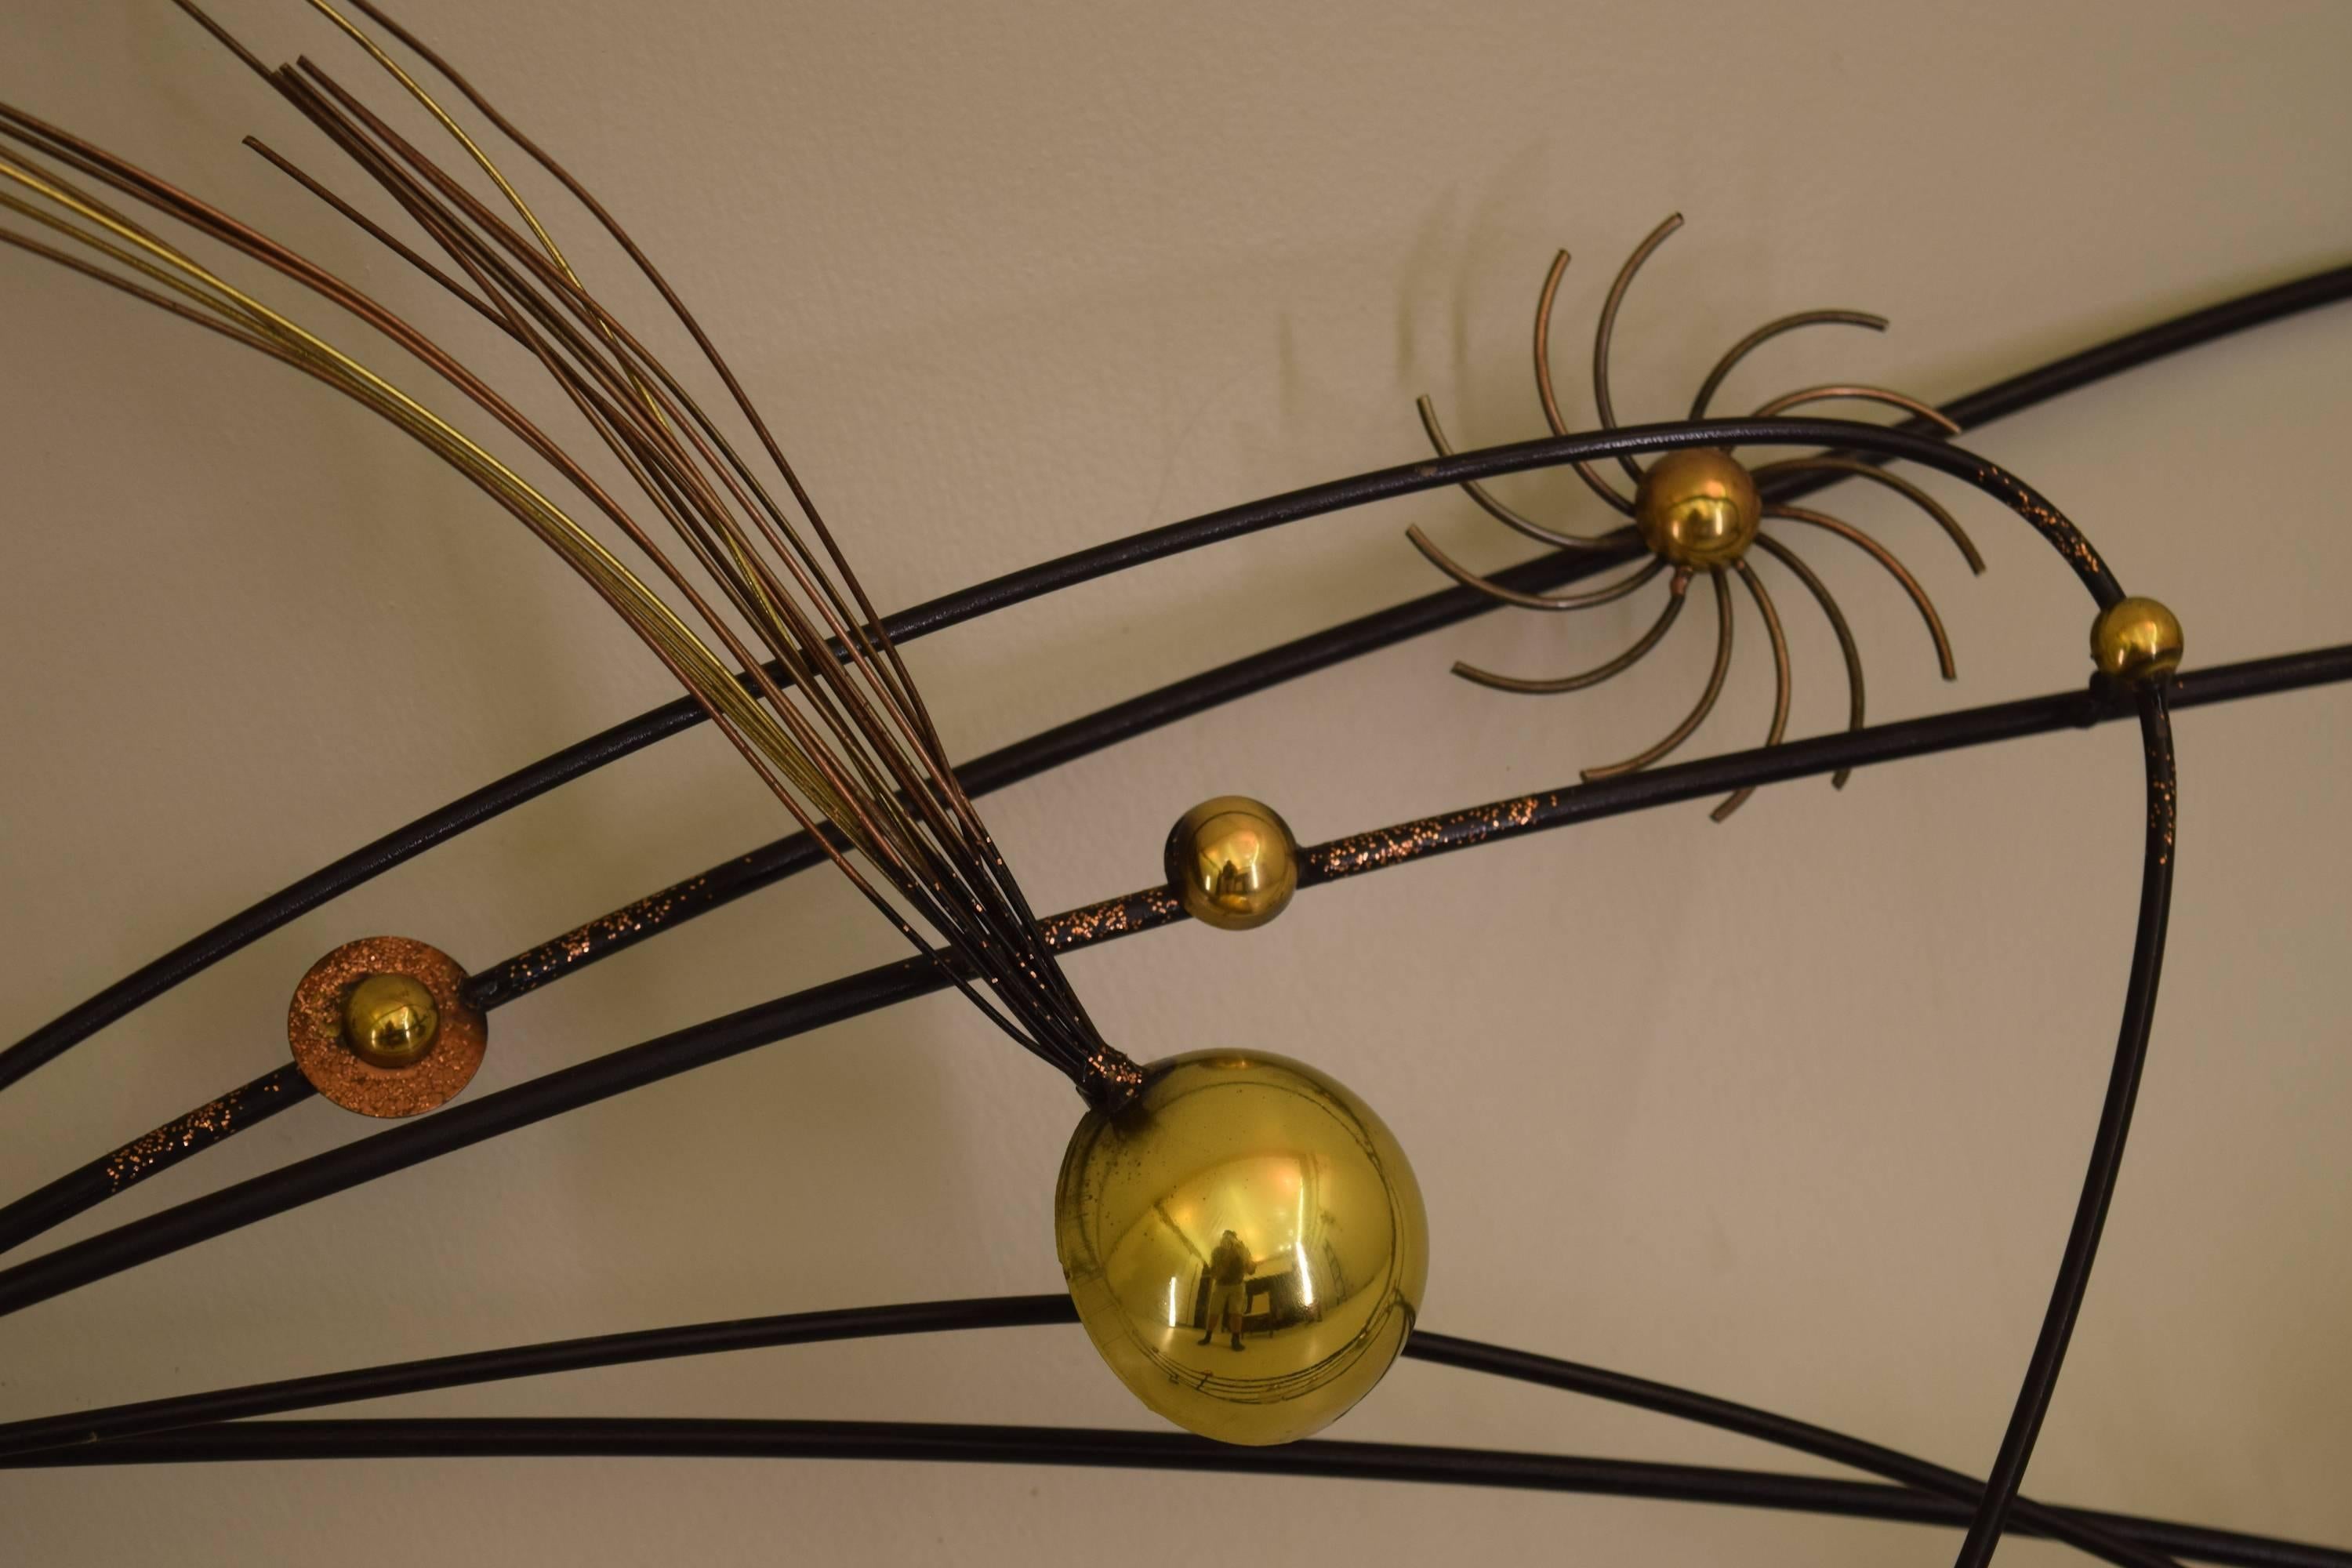 20th Century Atomic Galaxy Wall Sculpture by C. Jere, circa 1965